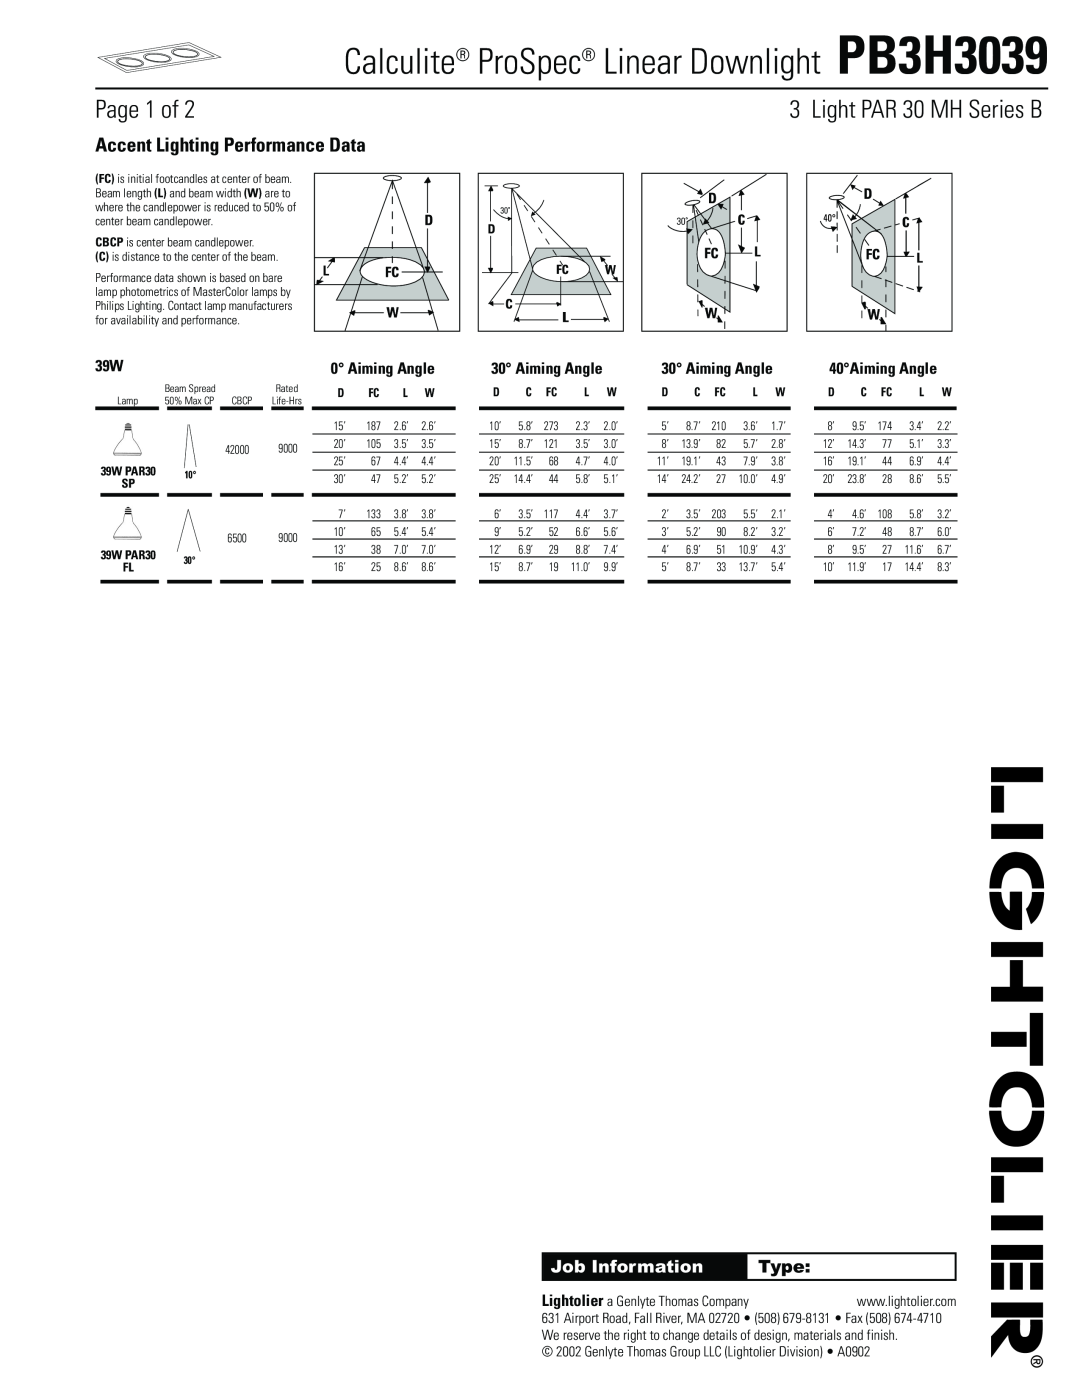 Lightolier Accent Lighting Performance Data, 40Aiming Angle, Calculite ProSpec Linear Downlight PB3H3039, Page 1 of 